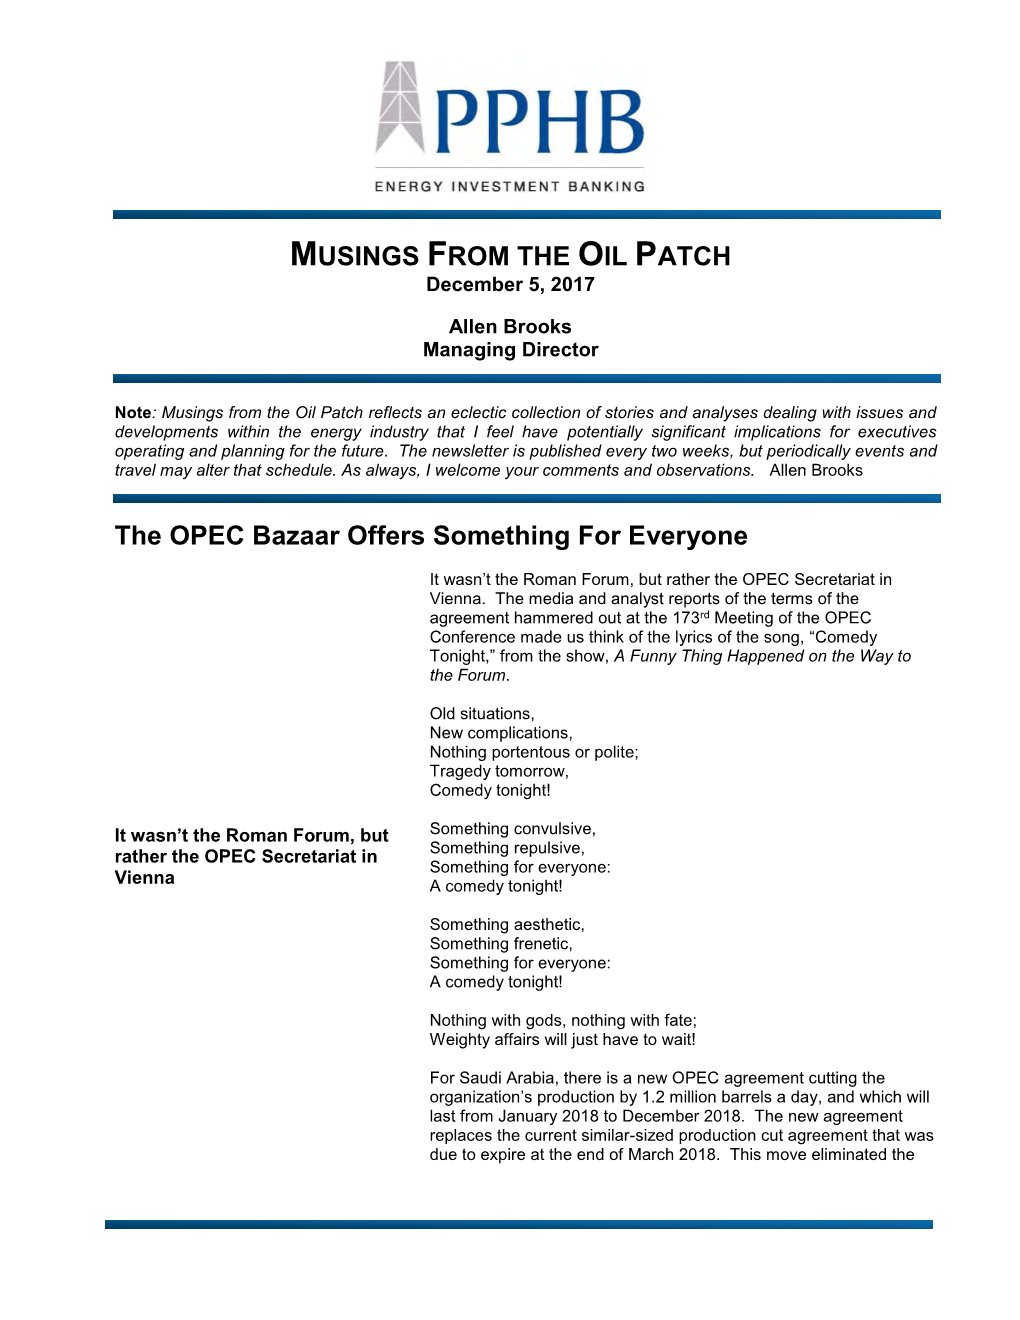 Since the Last Issue of Musings from the Oil Patch on January 19